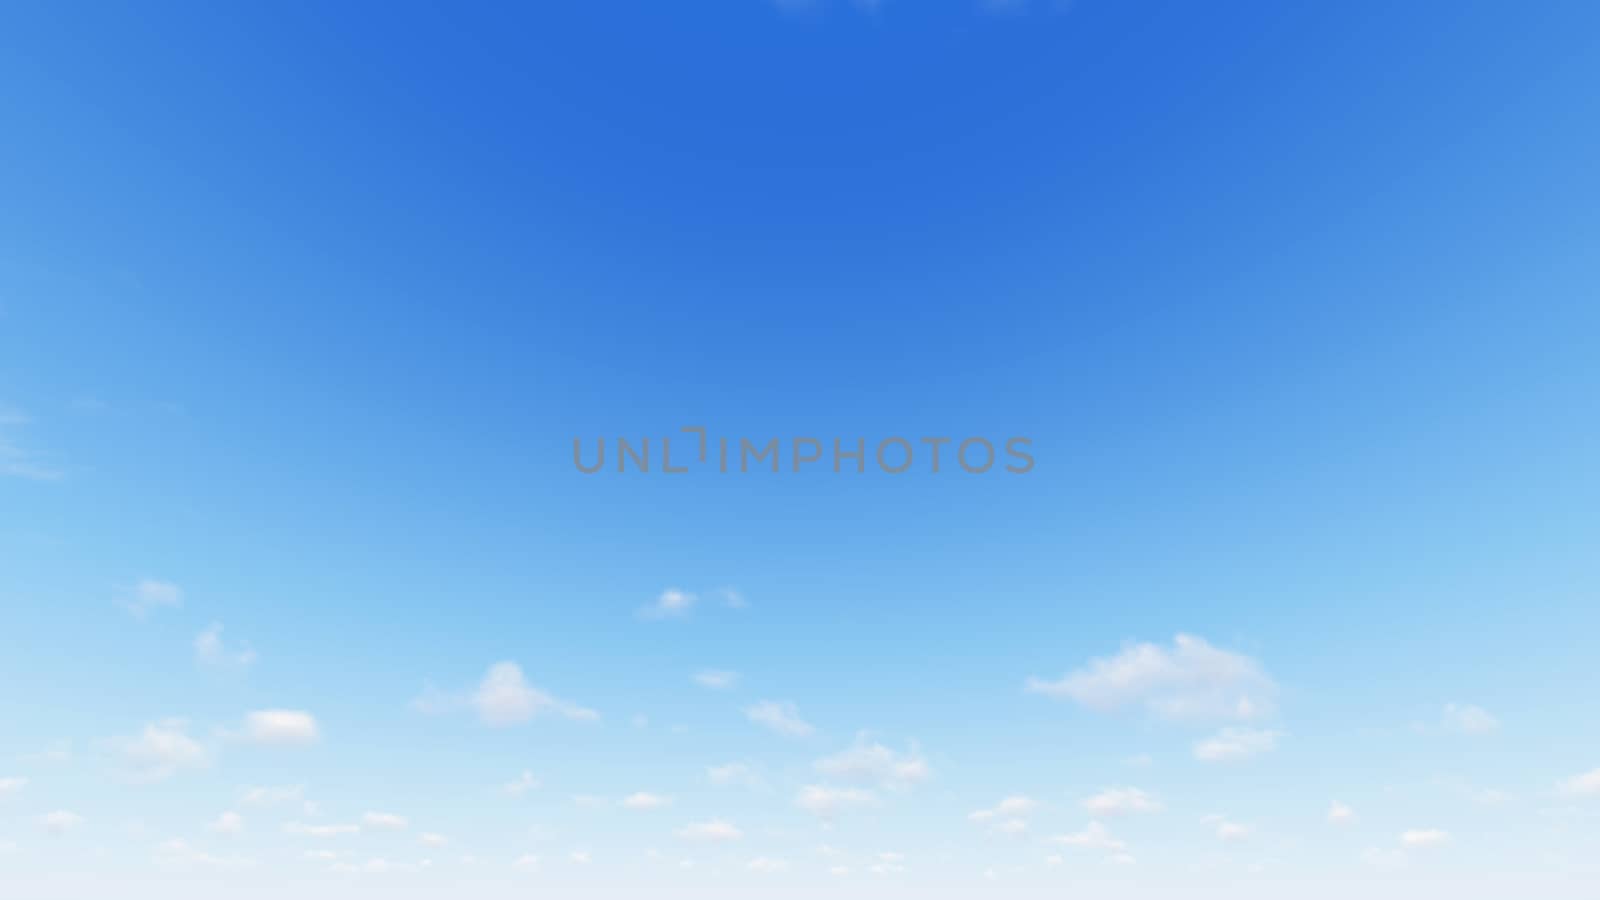 Cloudy blue sky abstract background, blue sky background with tiny clouds, 3d illustration